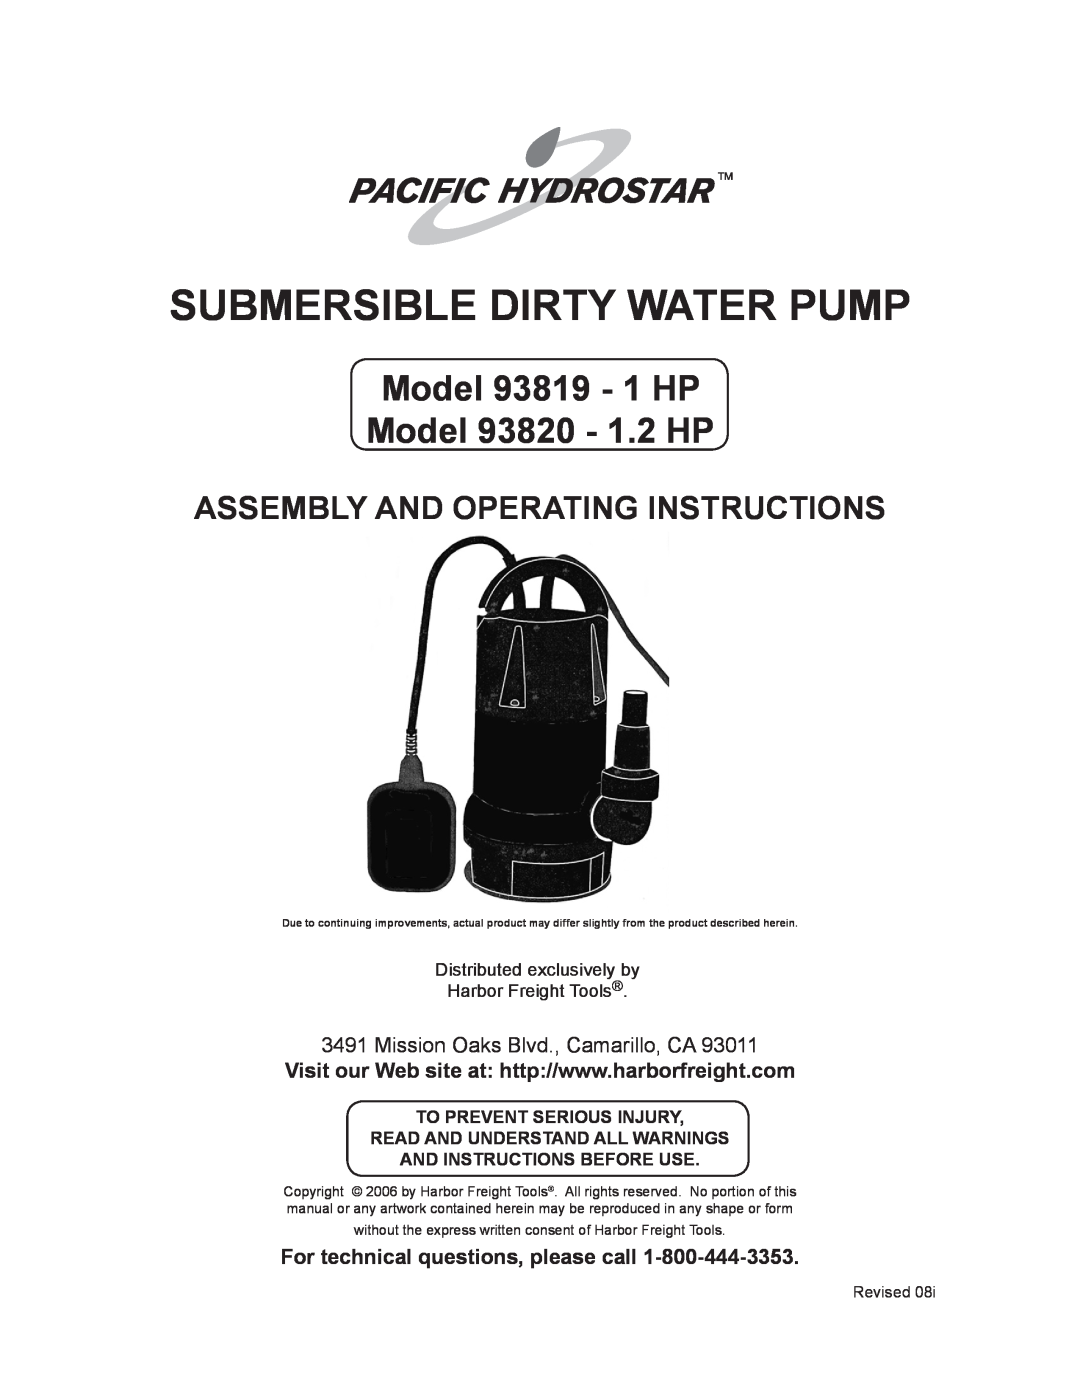 Harbor Freight Tools 93819, 93820 manual For technical questions, please call, Submersible Dirty Water Pump, Revised 